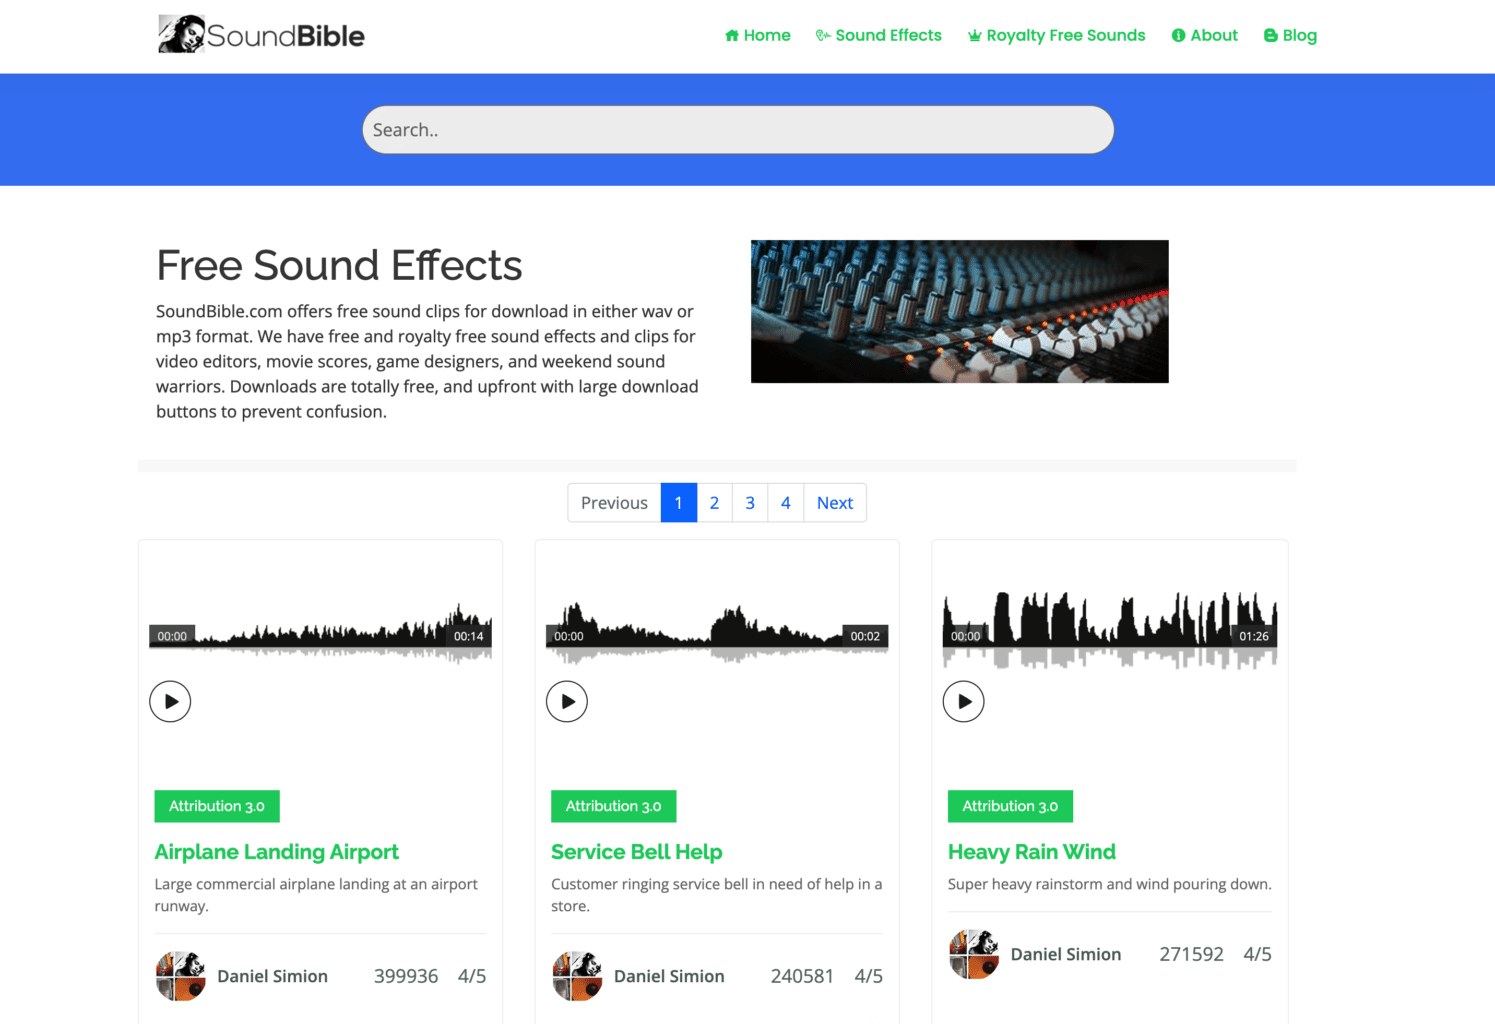 20 Awesome Free Sound Effects Sites - Reviewed